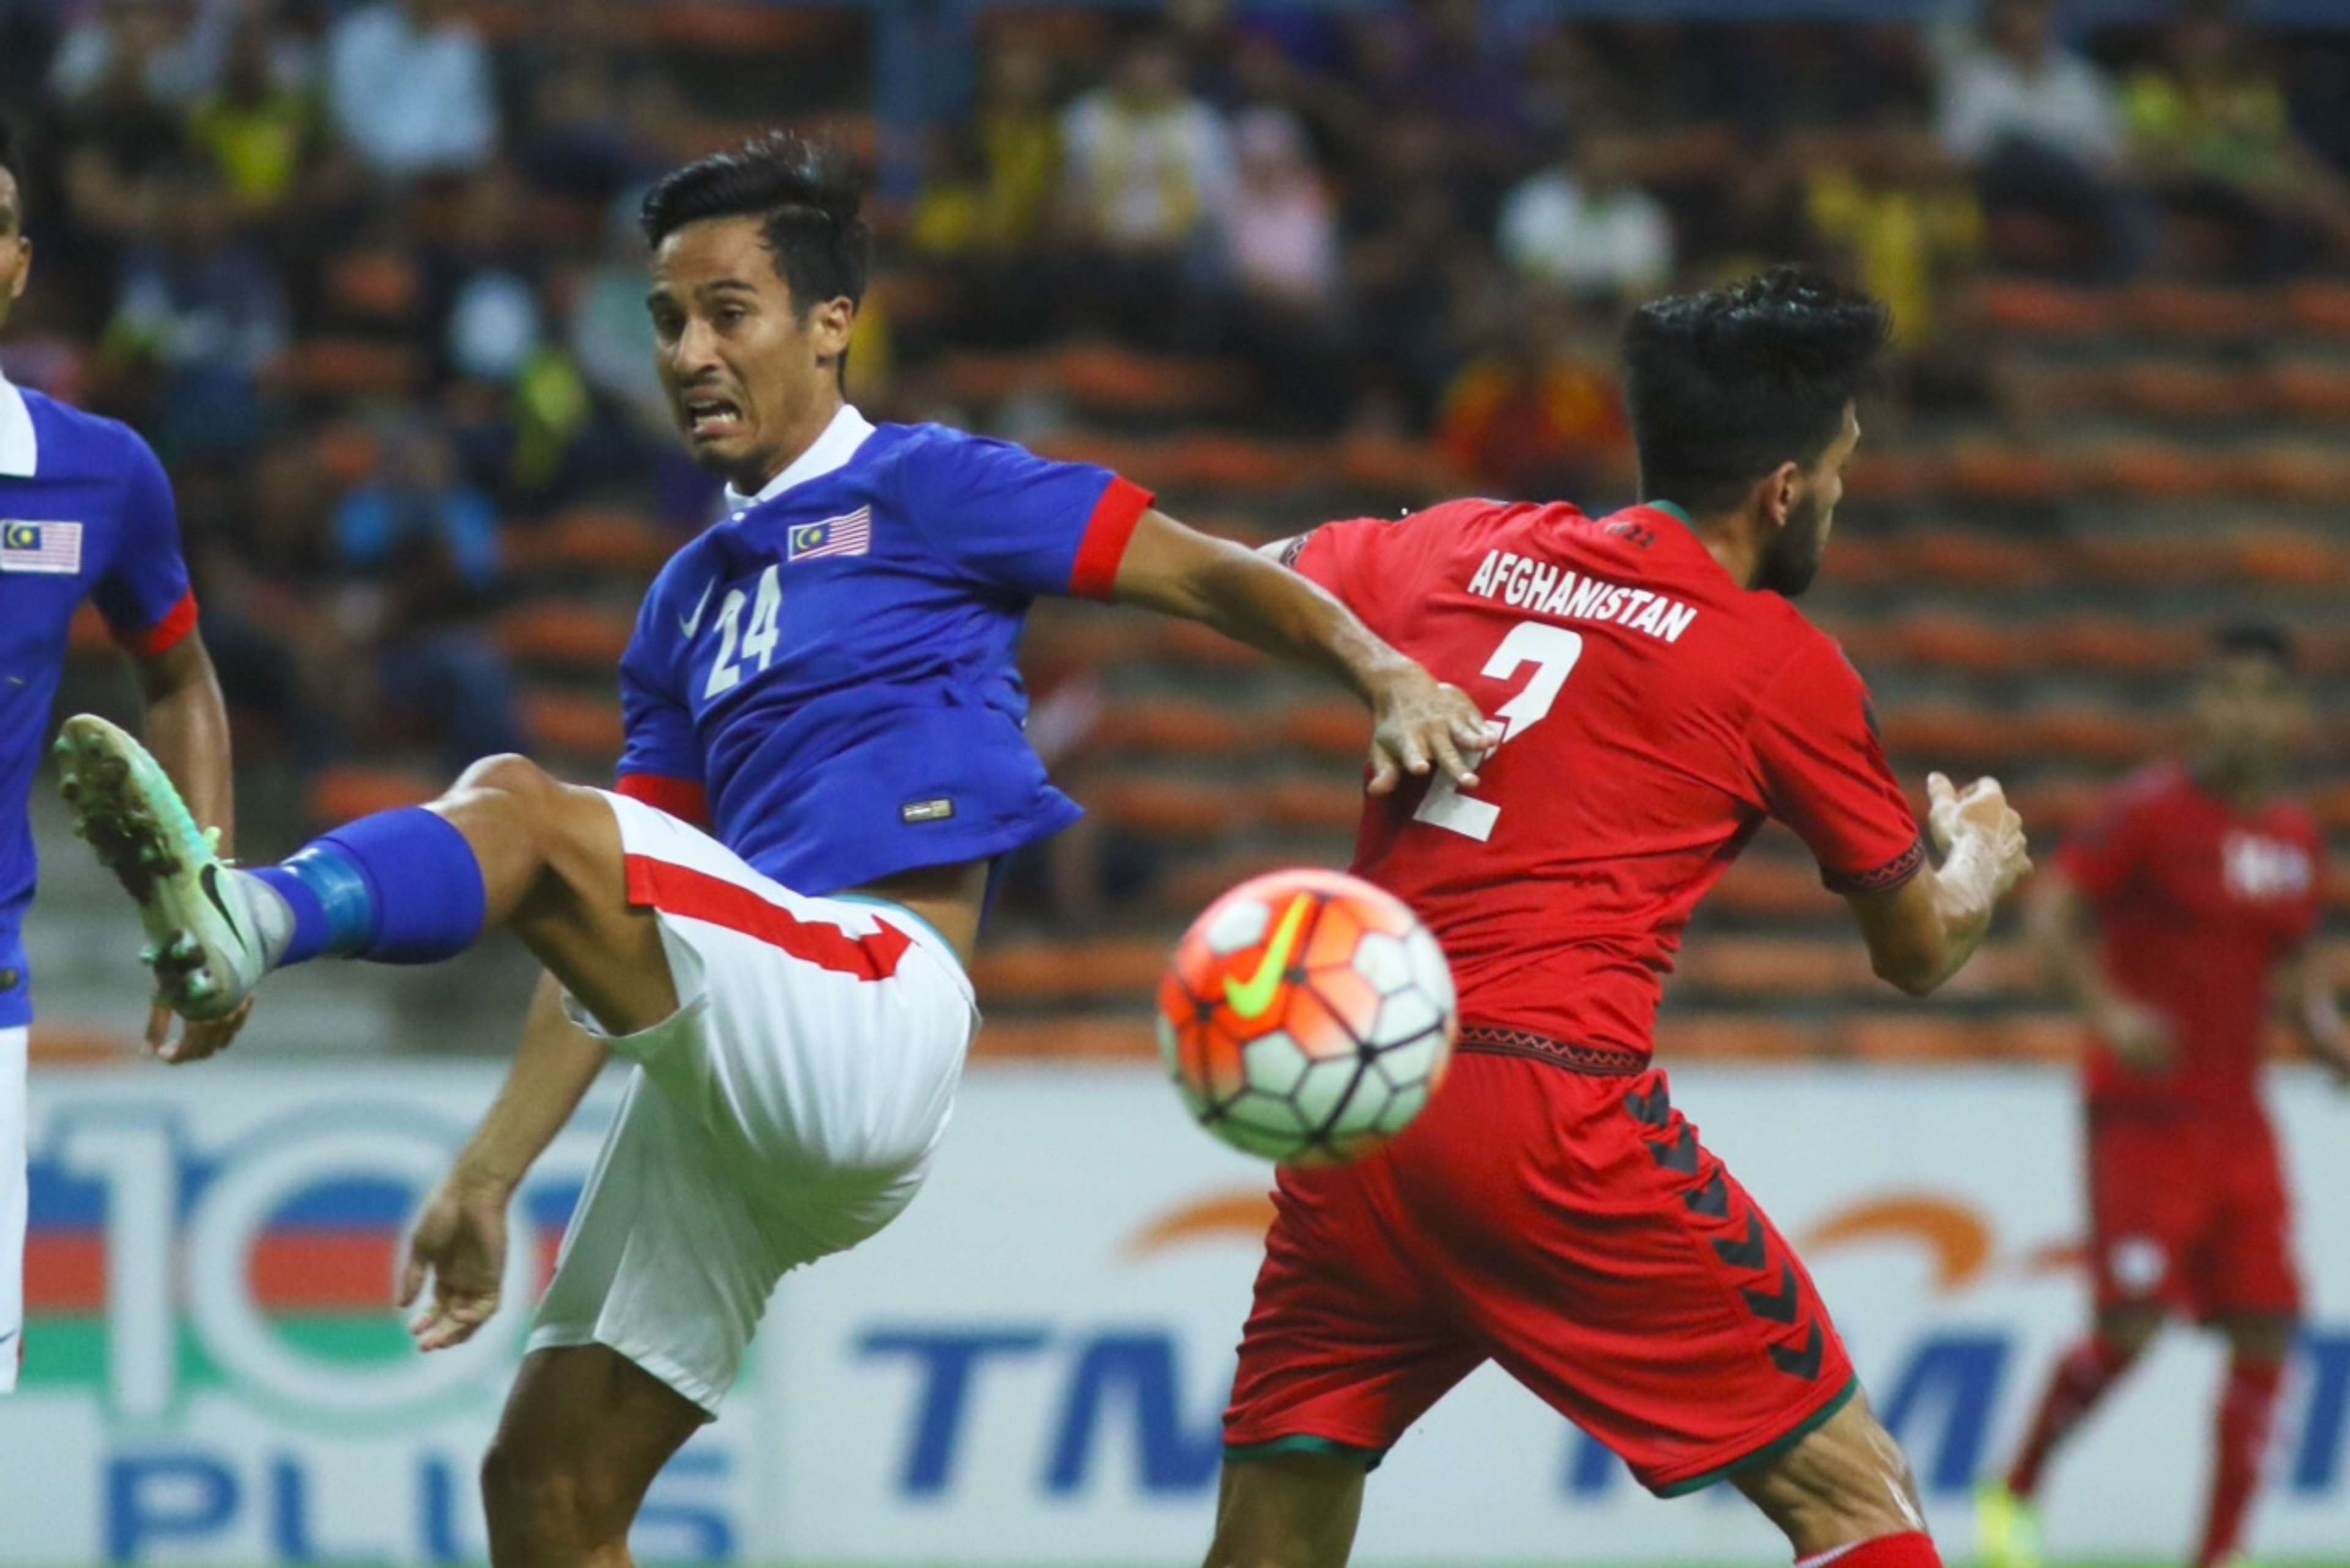 Malaysia's Matthew Davies (left) vies for the ball with an Afghanistan player 11/10/2016